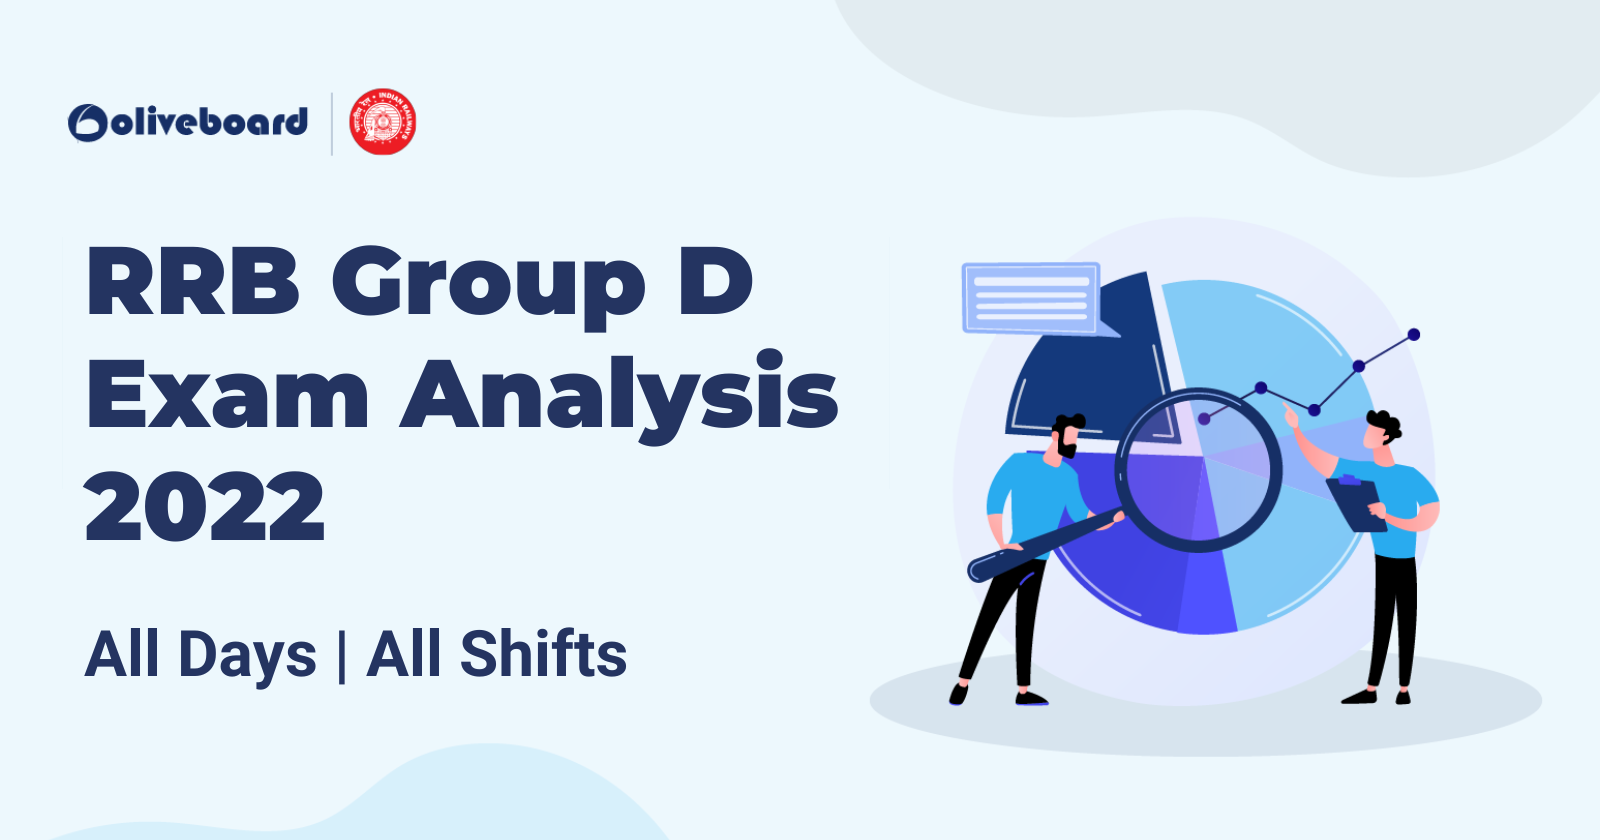 RRB Group D Analysis 2022 - All days, All Shifts